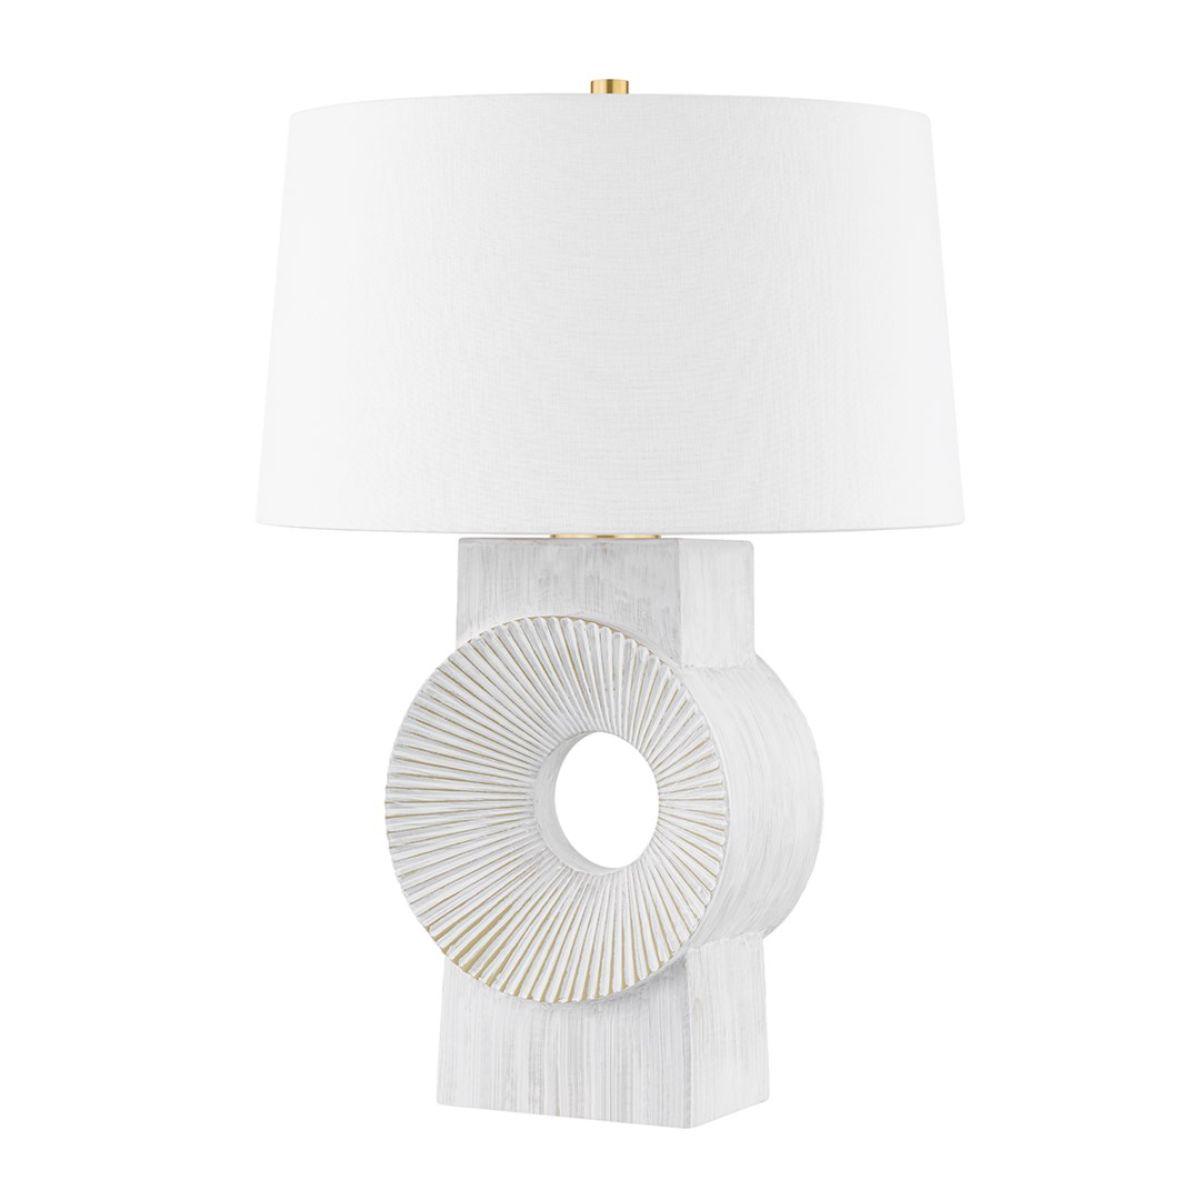 Milner Table Lamp Whitewash Ceramic with Aged Brass Accents